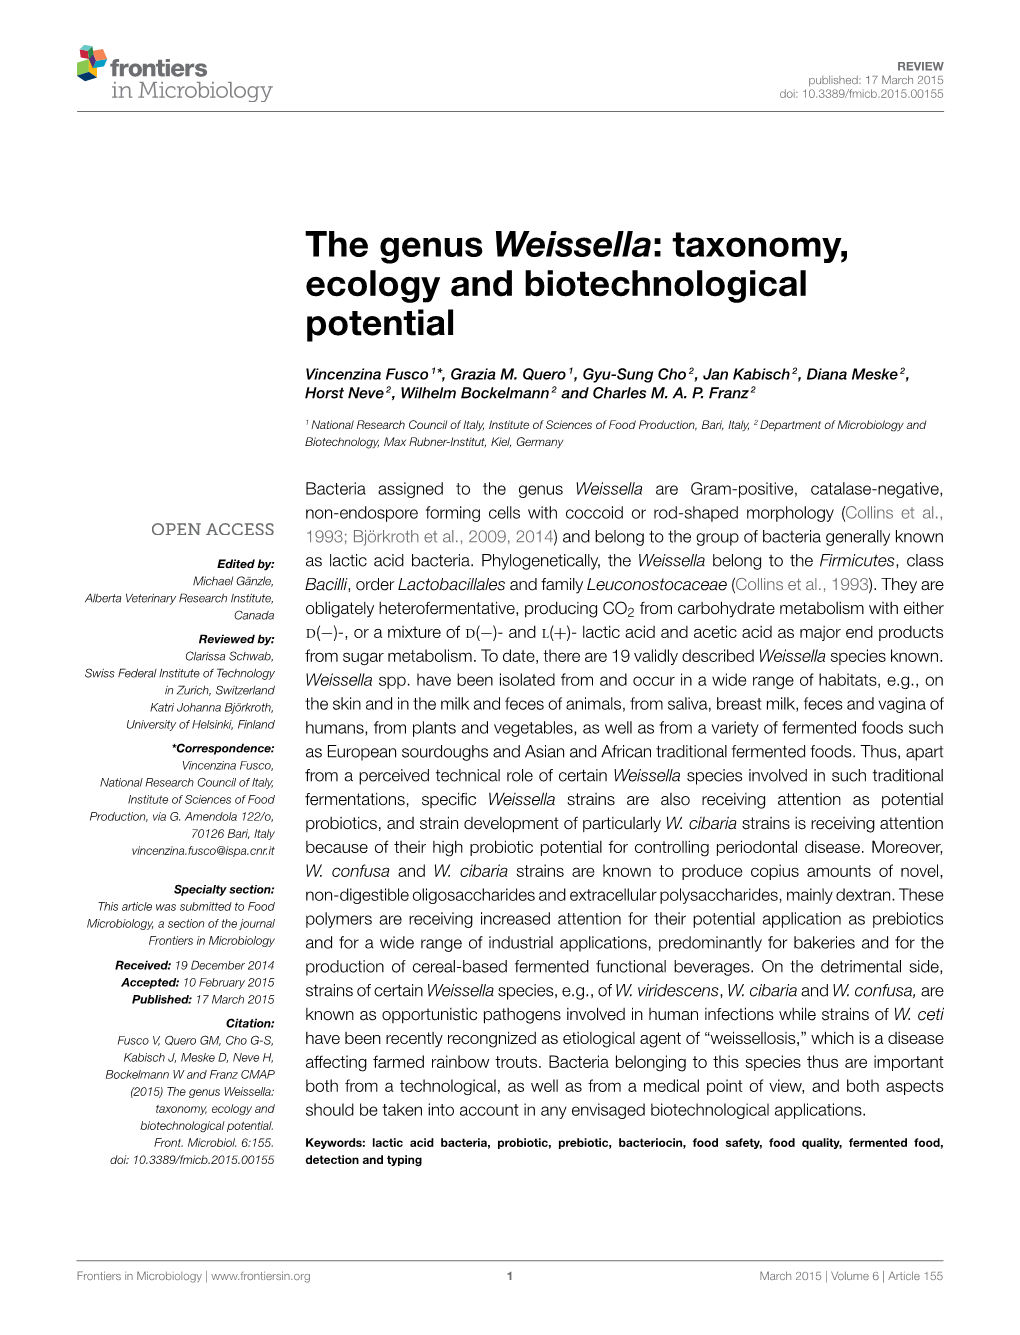 The Genus Weissella: Taxonomy, Ecology and Biotechnological Potential